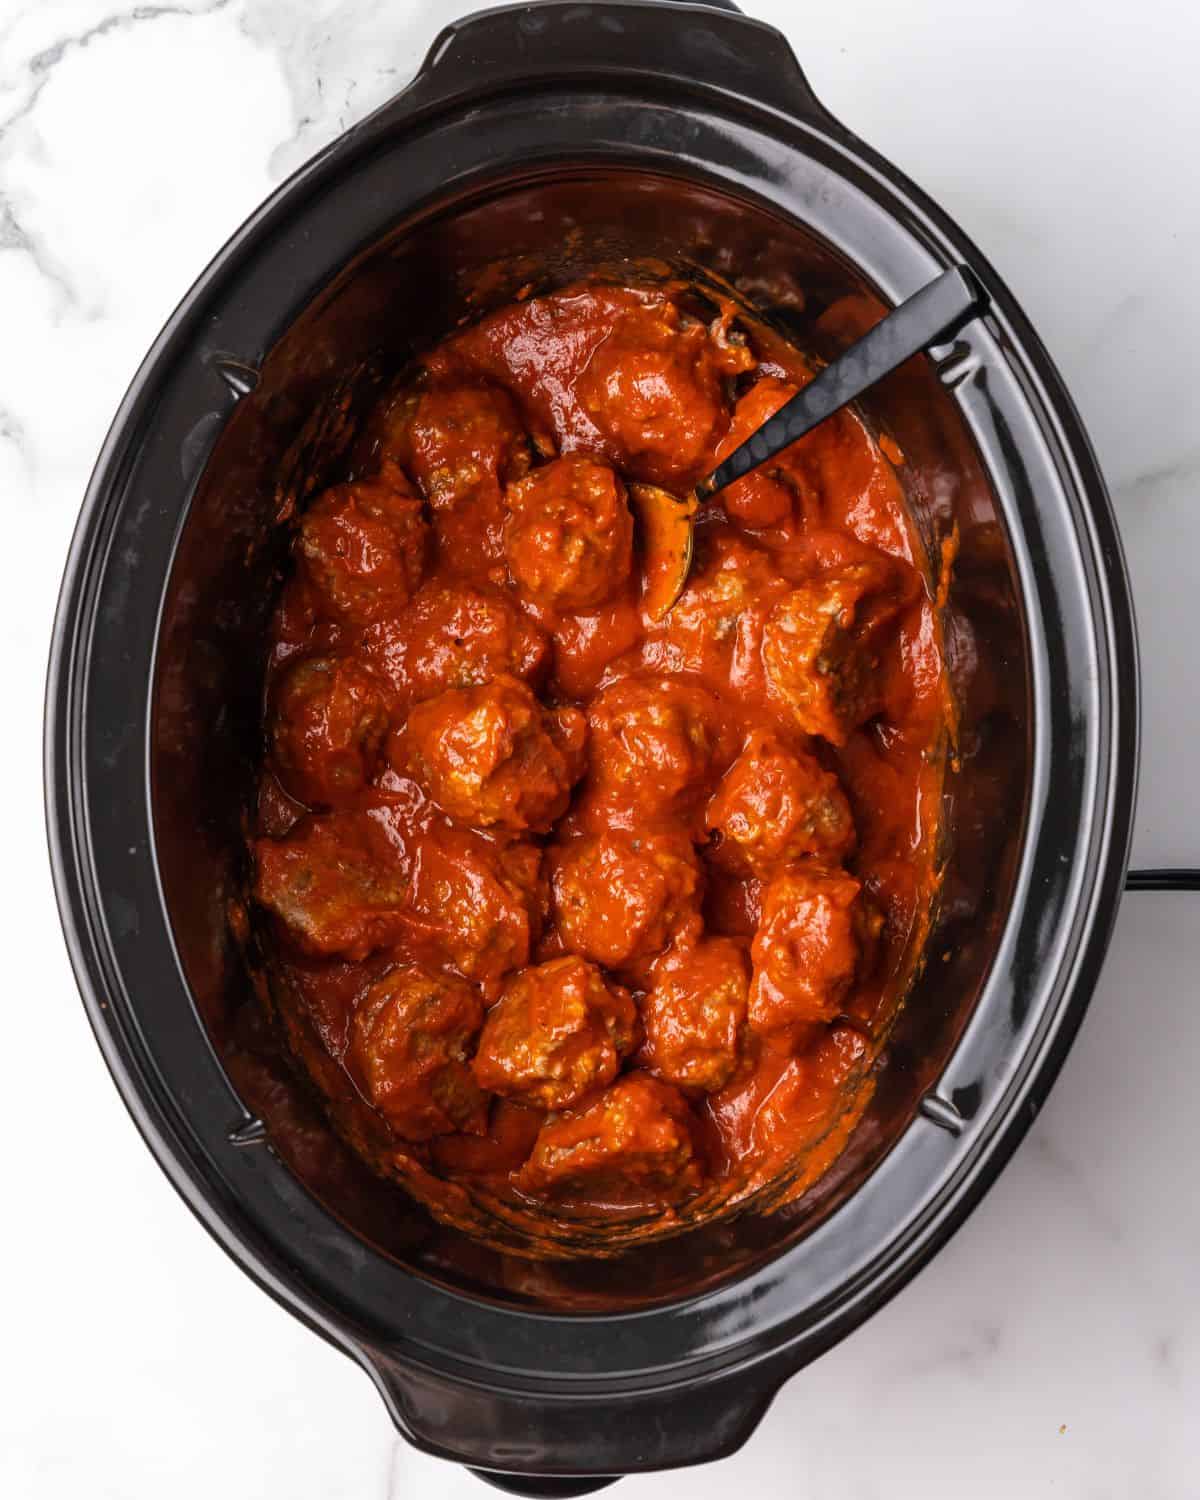 meatballs and sauce in a slow cooker.